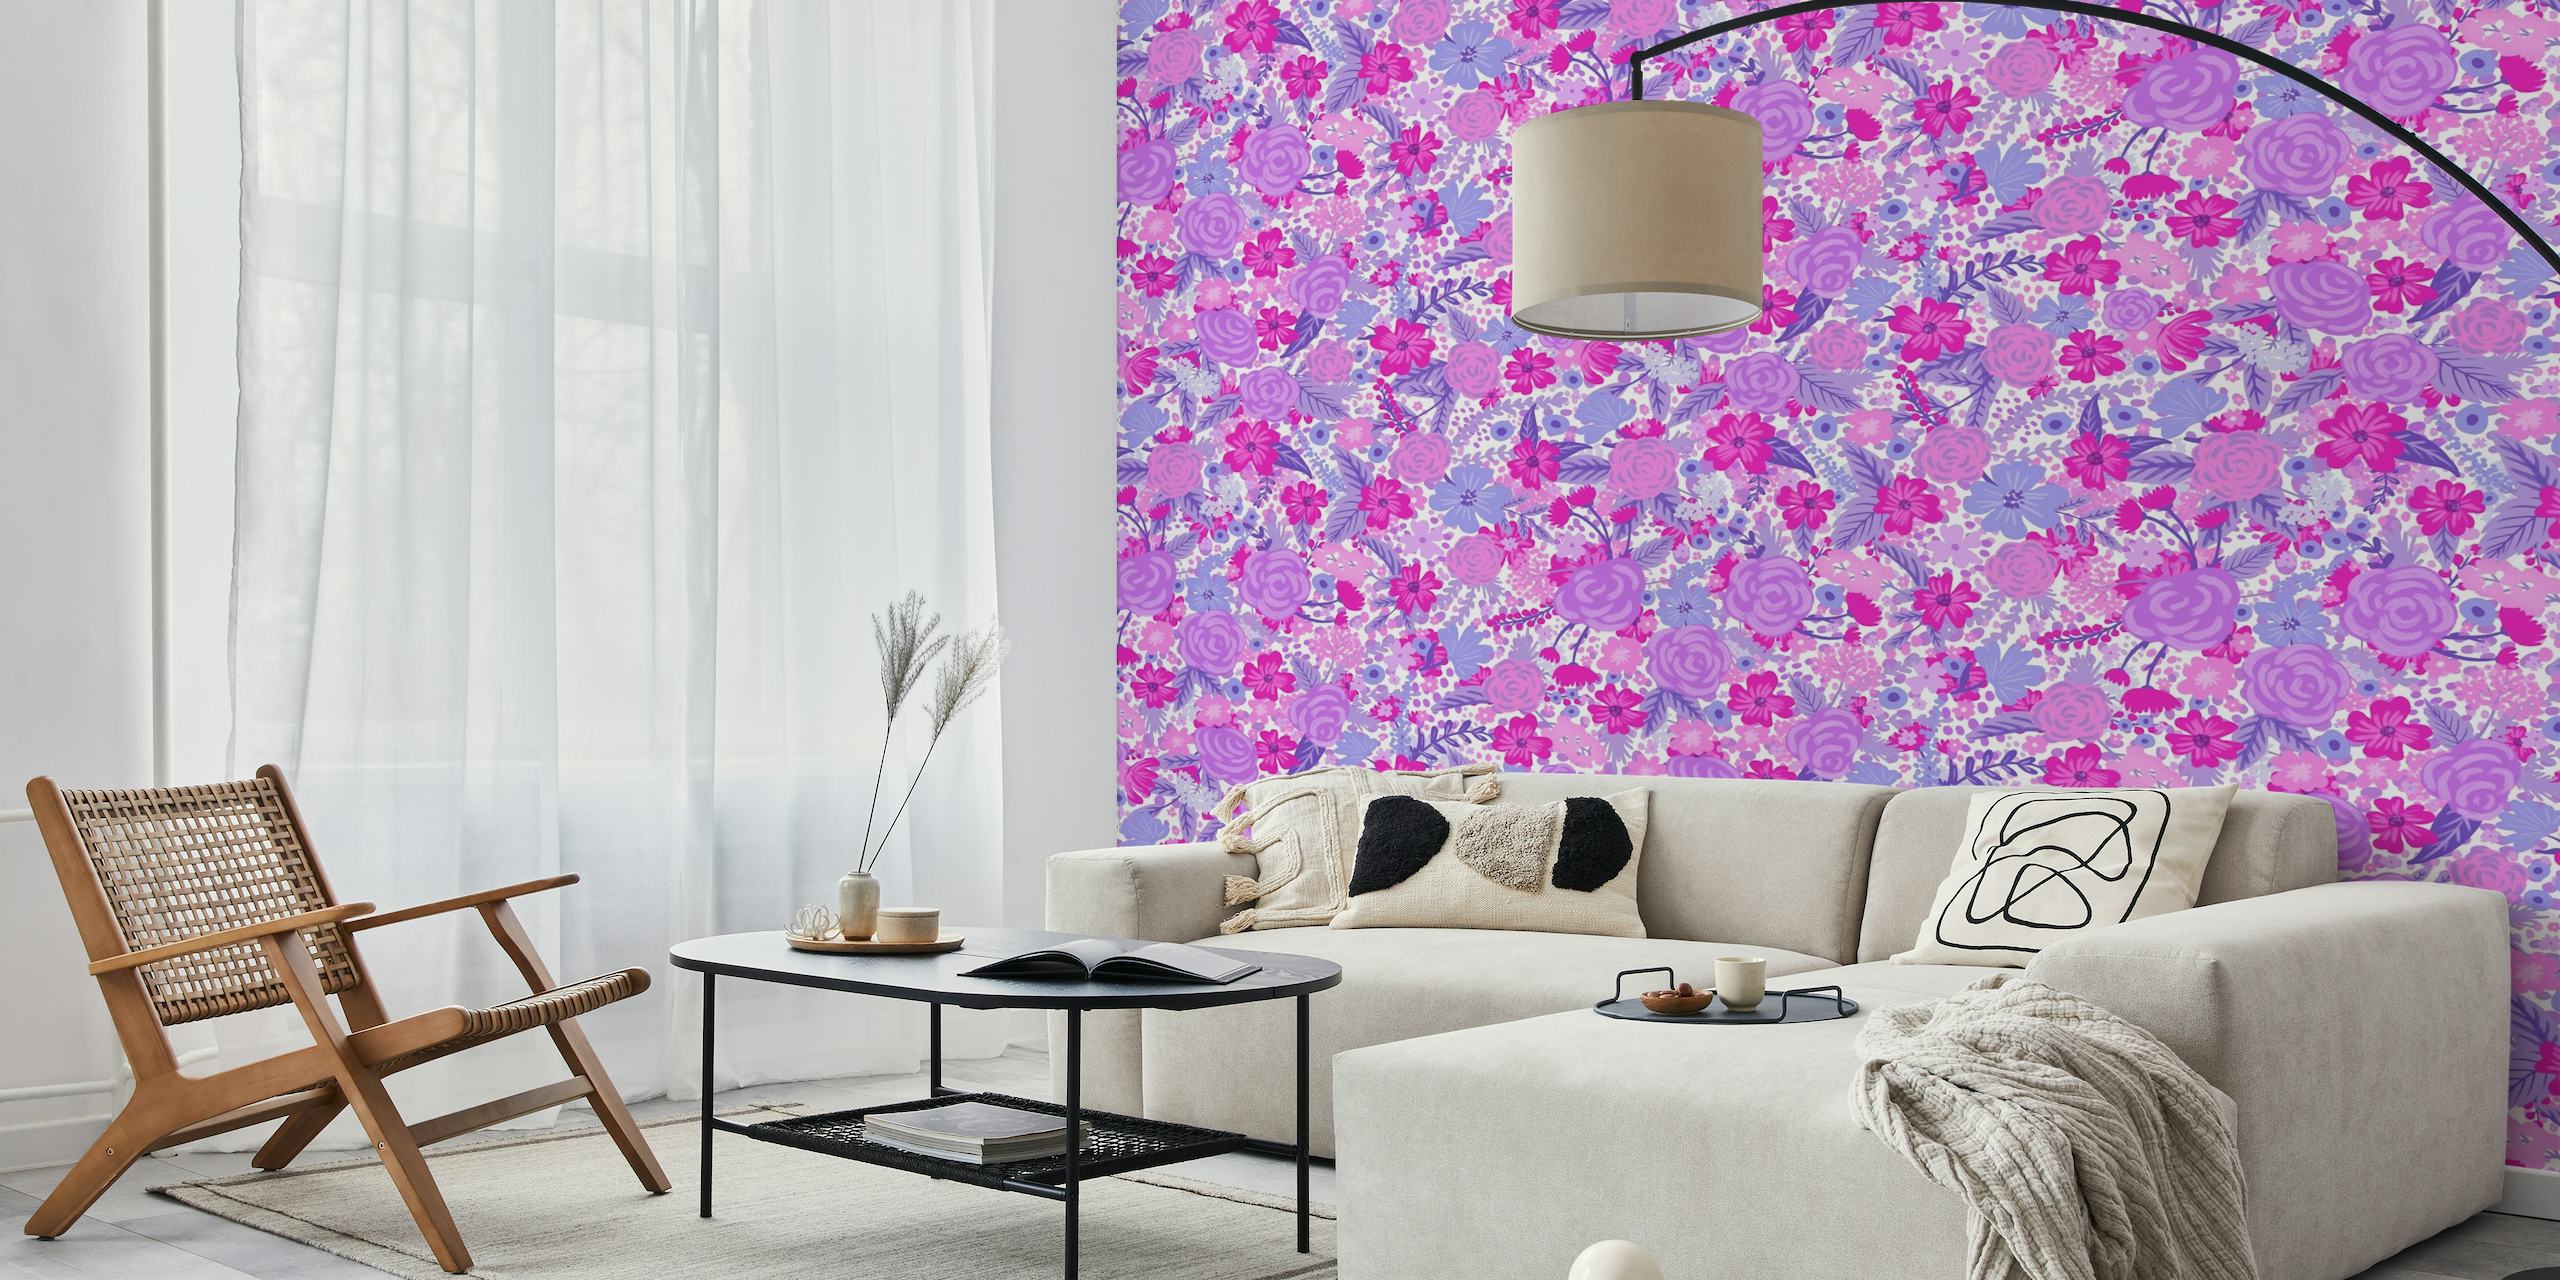 A vibrant and intricate Intangible Flower Pattern 3 wall mural with purple and pink floral designs.